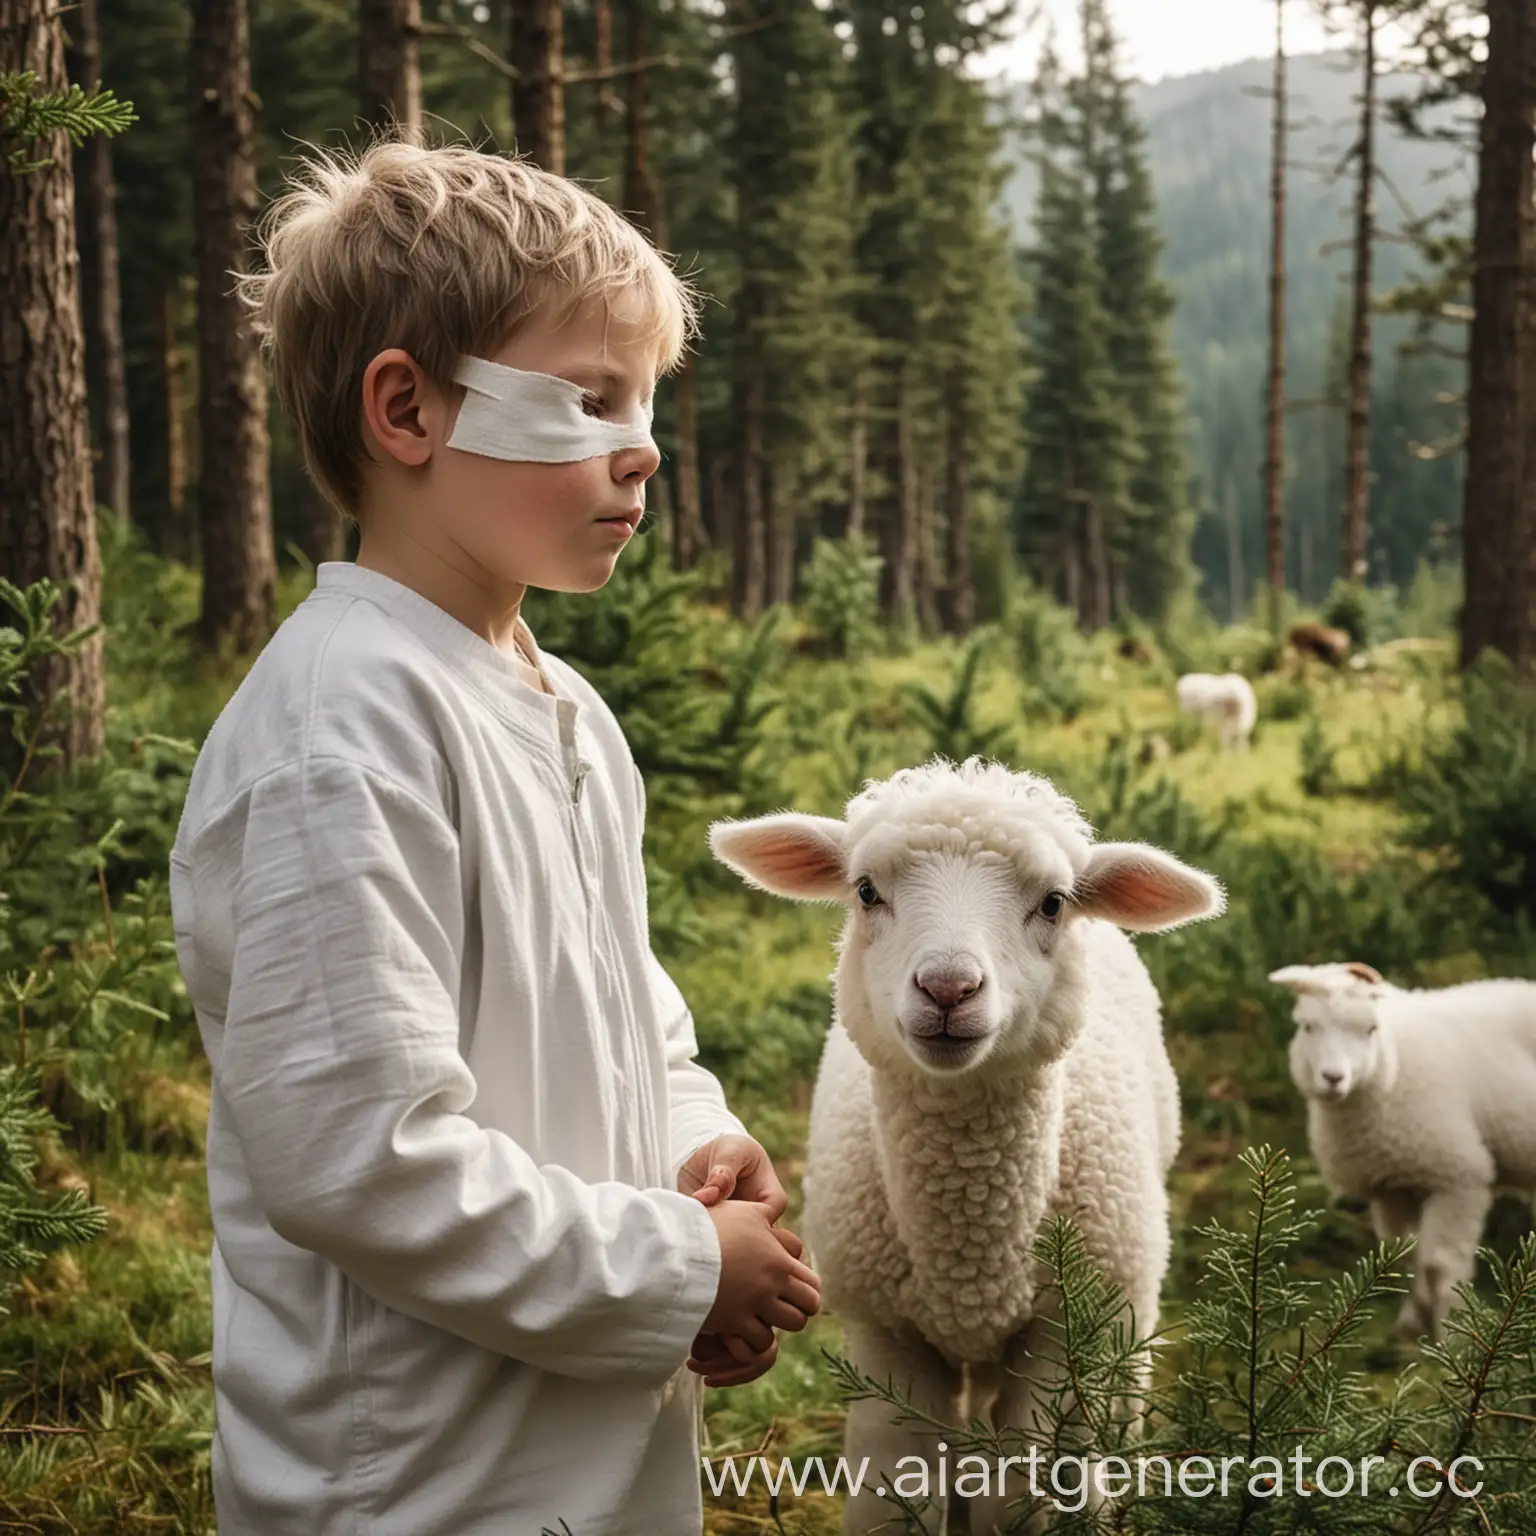 Blindfolded-Boy-Standing-with-Lamb-in-Enchanted-Forest